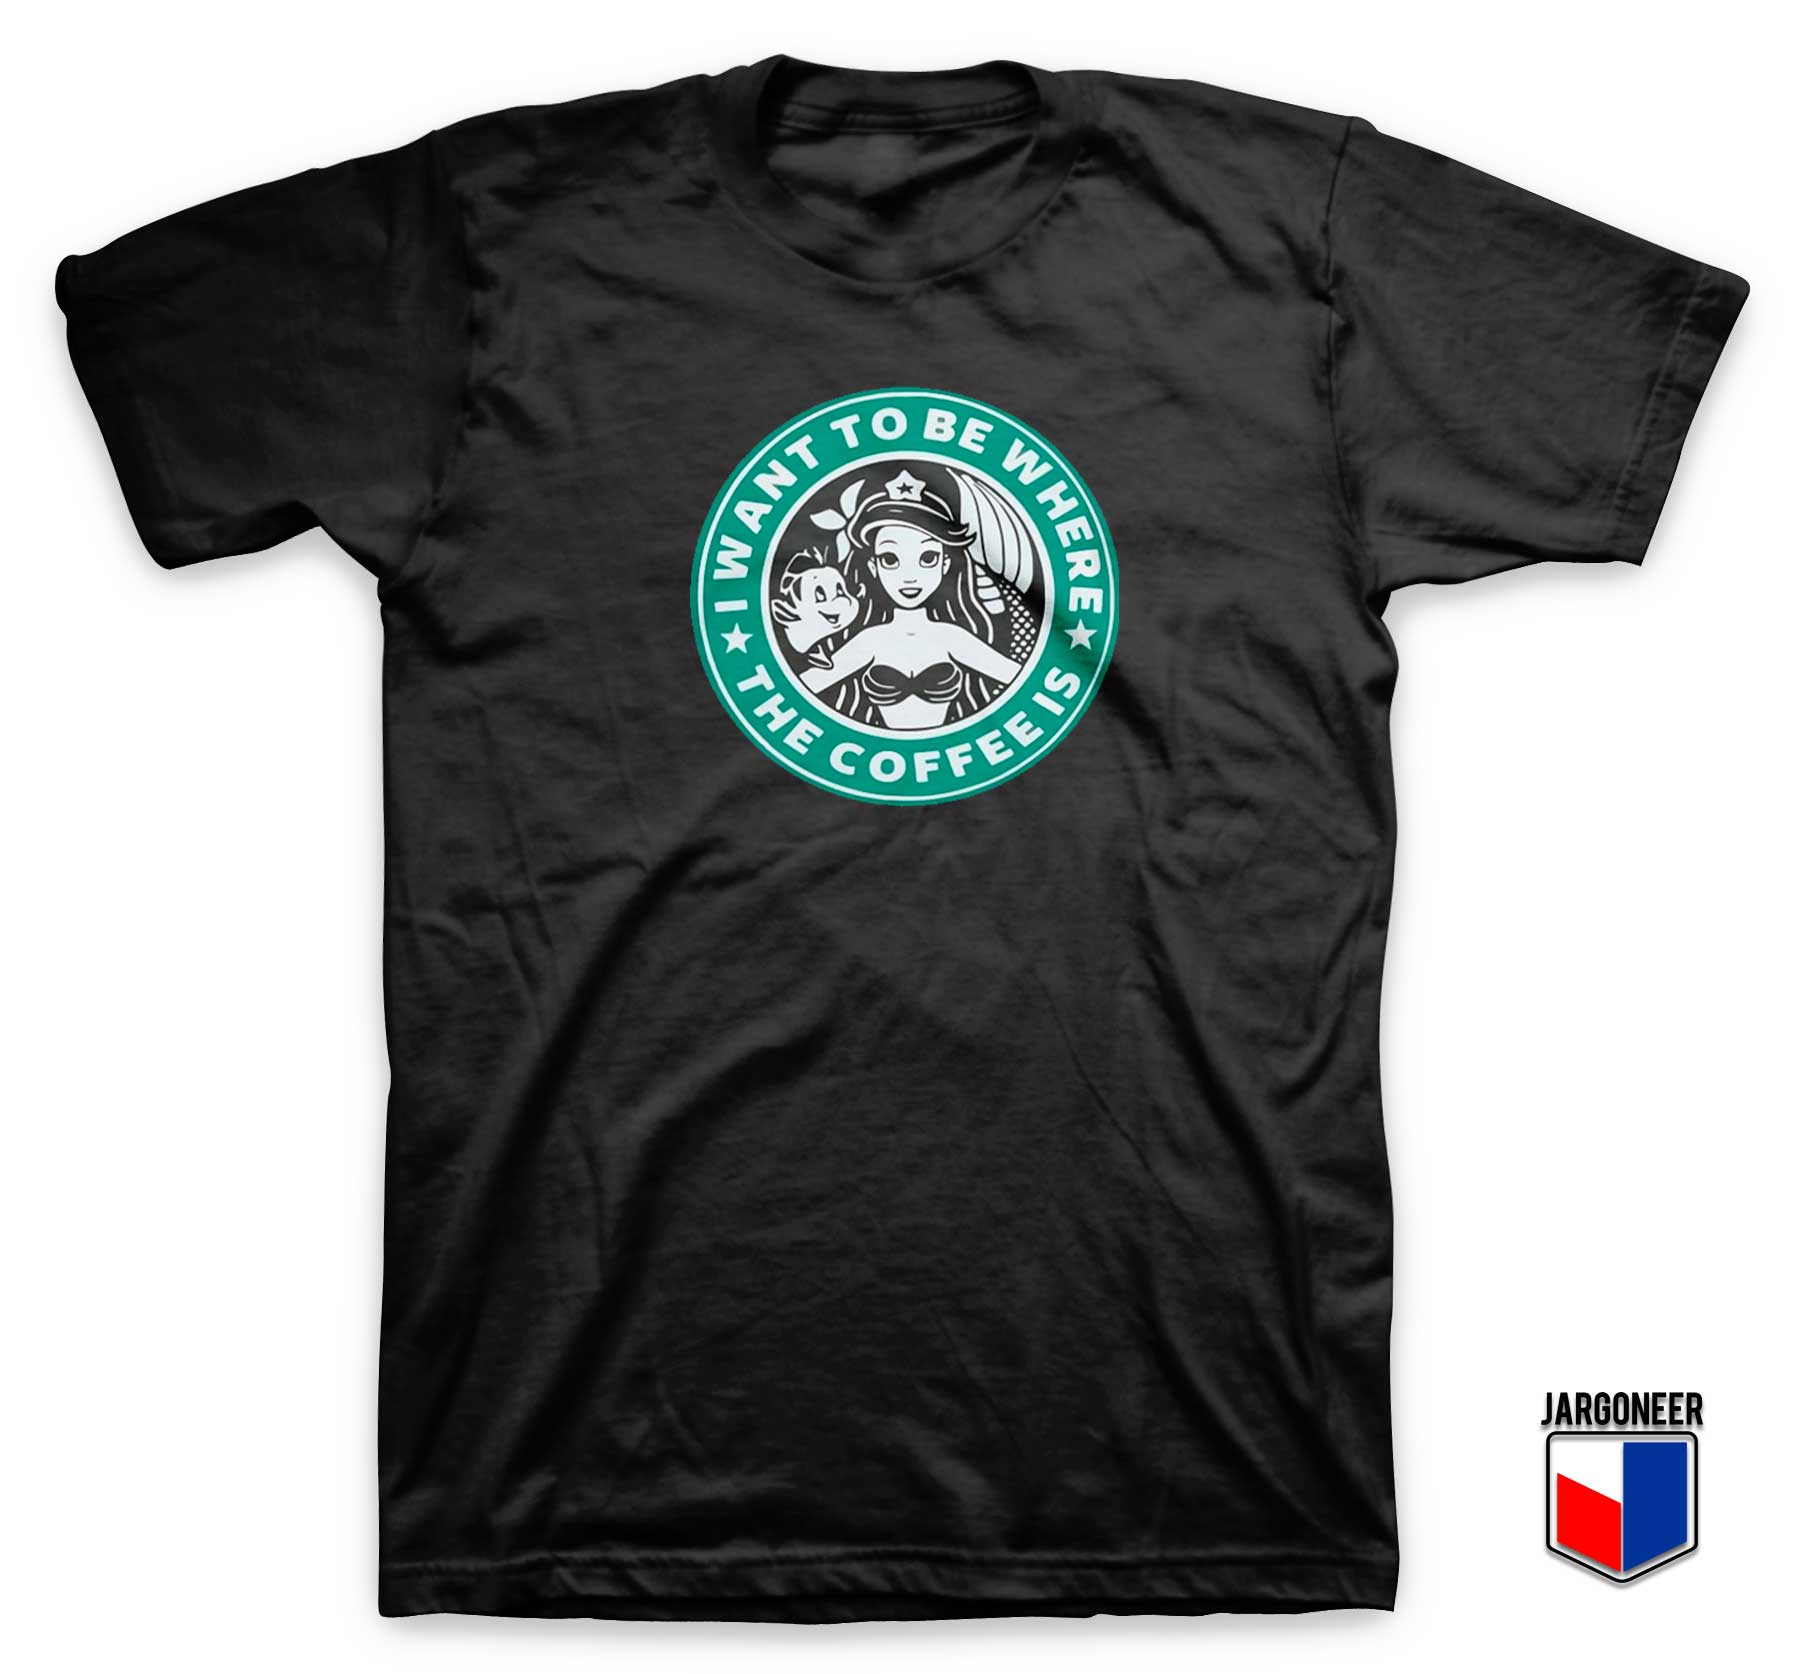 I Want To Be Where The Coffee Is Mermaid T Shirt - Shop Unique Graphic Cool Shirt Designs